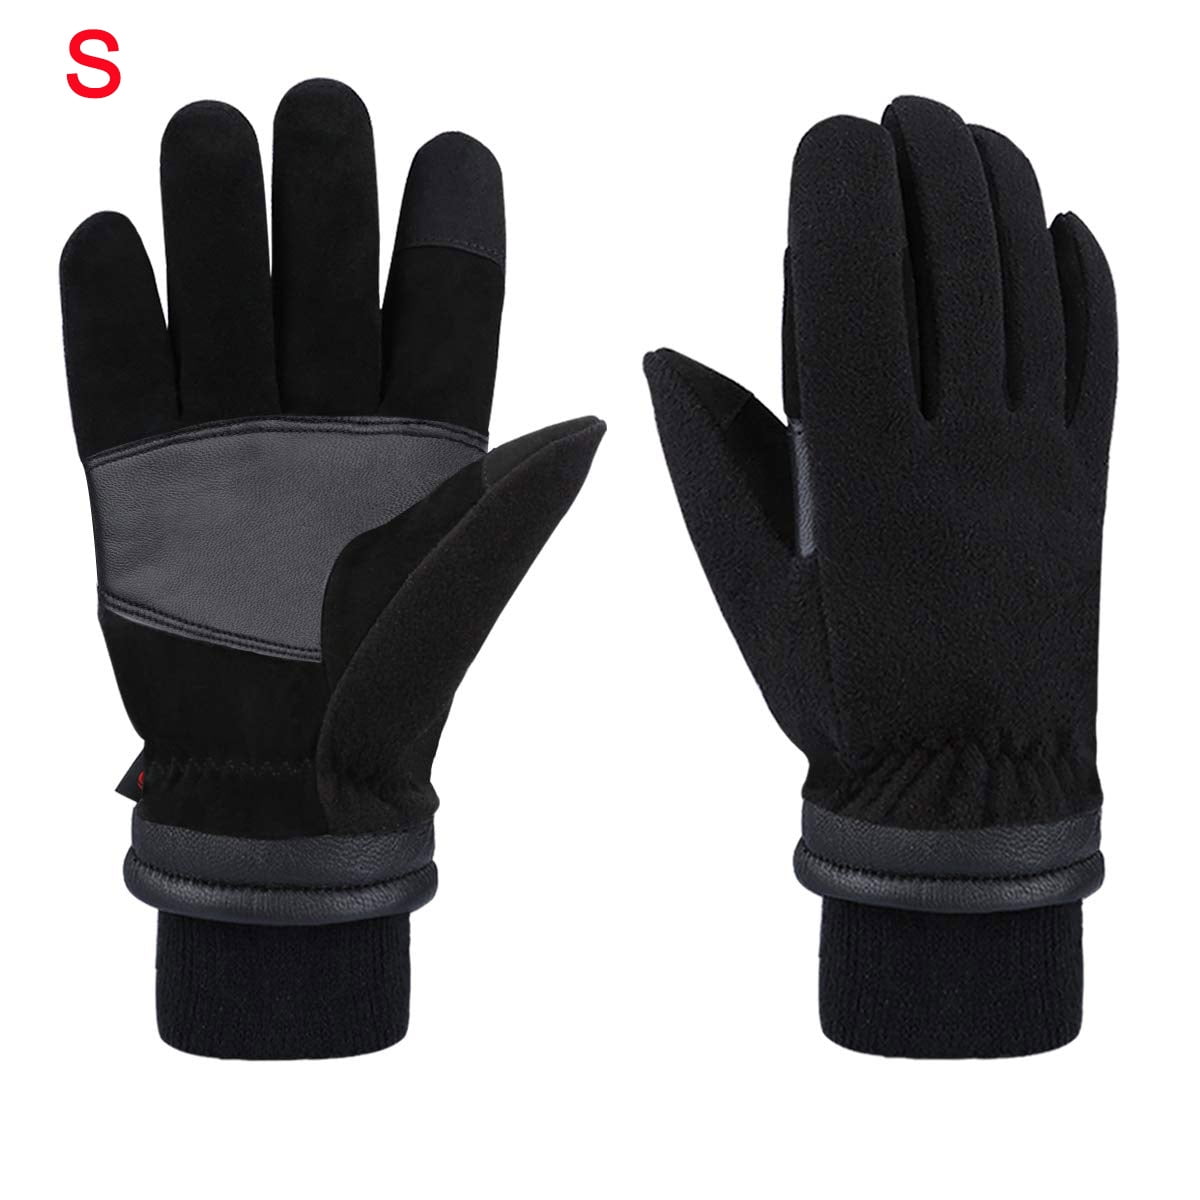 12/24 Pairs PU Hand Palm Protect Gloves Builders Worker Safety Glove S M L New 